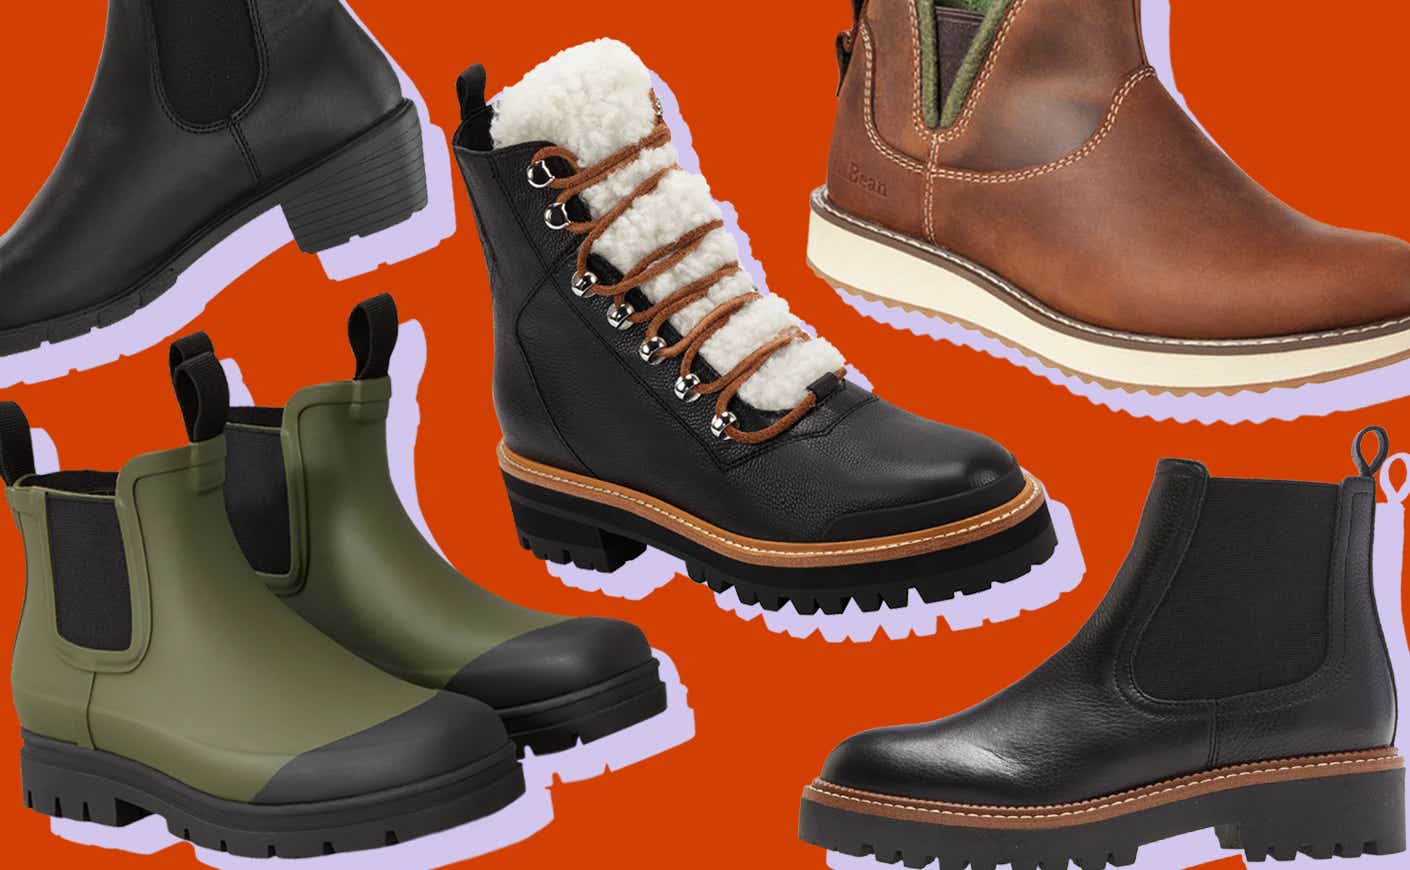 The 15 Best Winter and Rain Boots: Stylish Cute Snow Boots